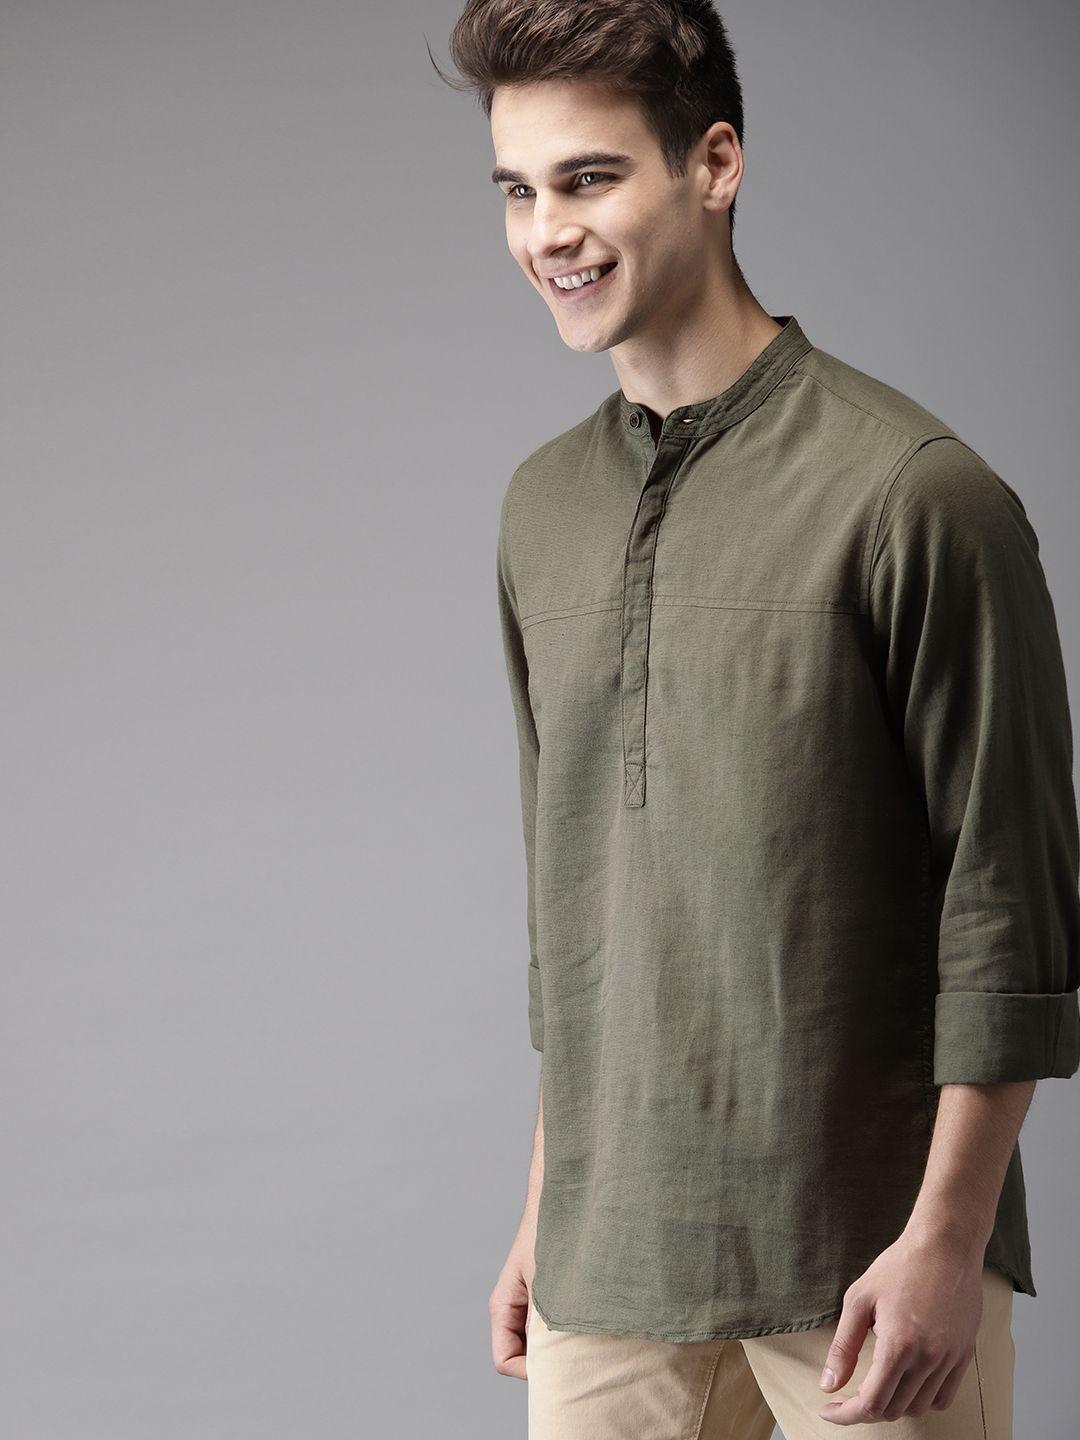 here&now-men-olive-green-regular-fit-solid-casual-shirt